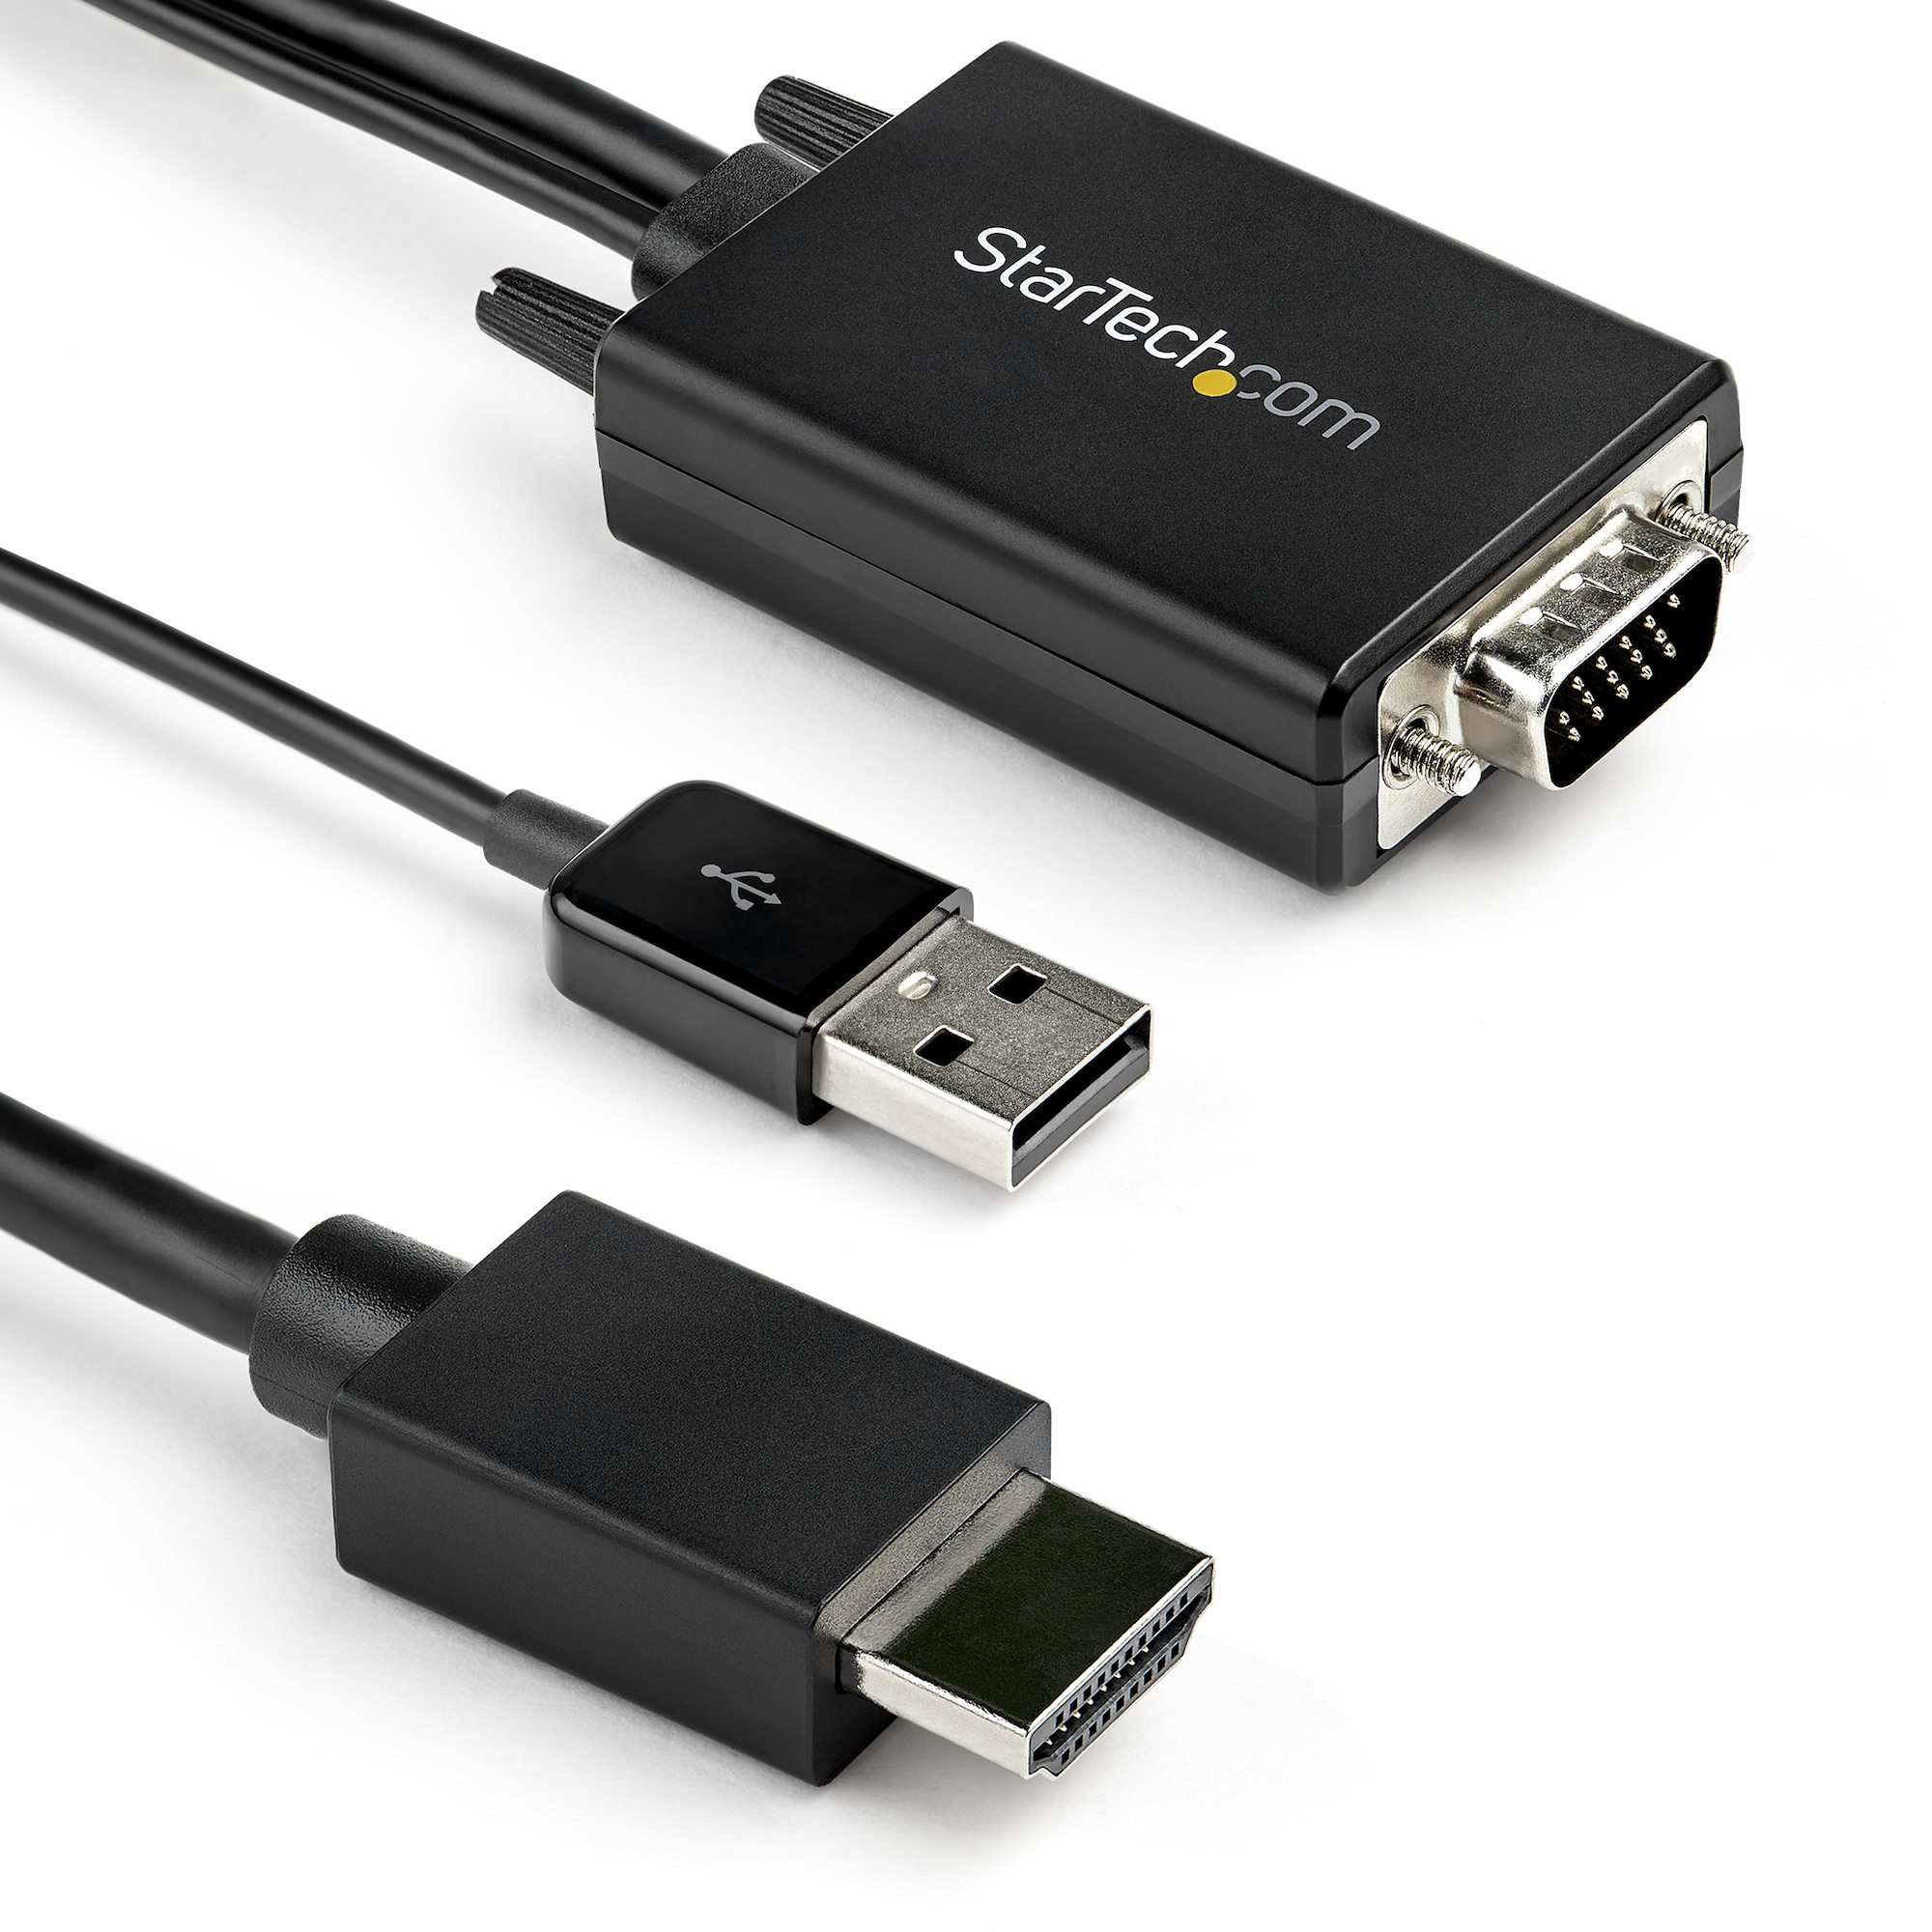 vene deltage afsnit 6ft VGA to HDMI Converter Cable Adapter - Video Converters | StarTech.com